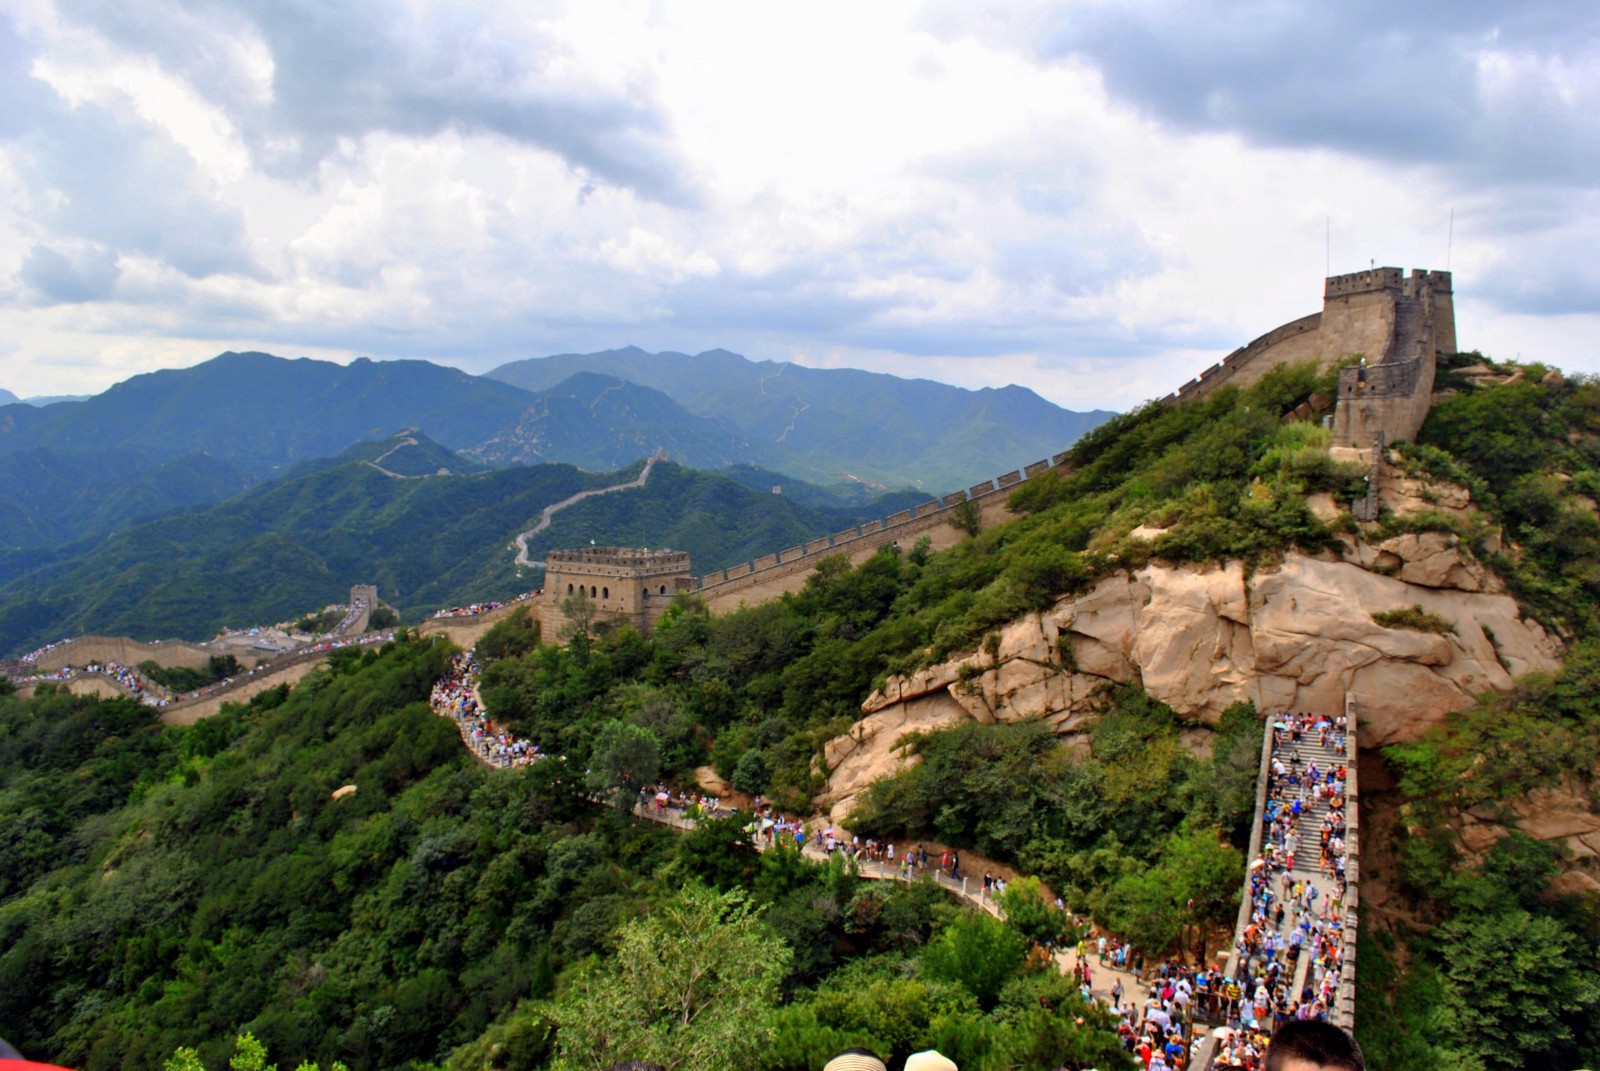 Walking across the Great Wall of China